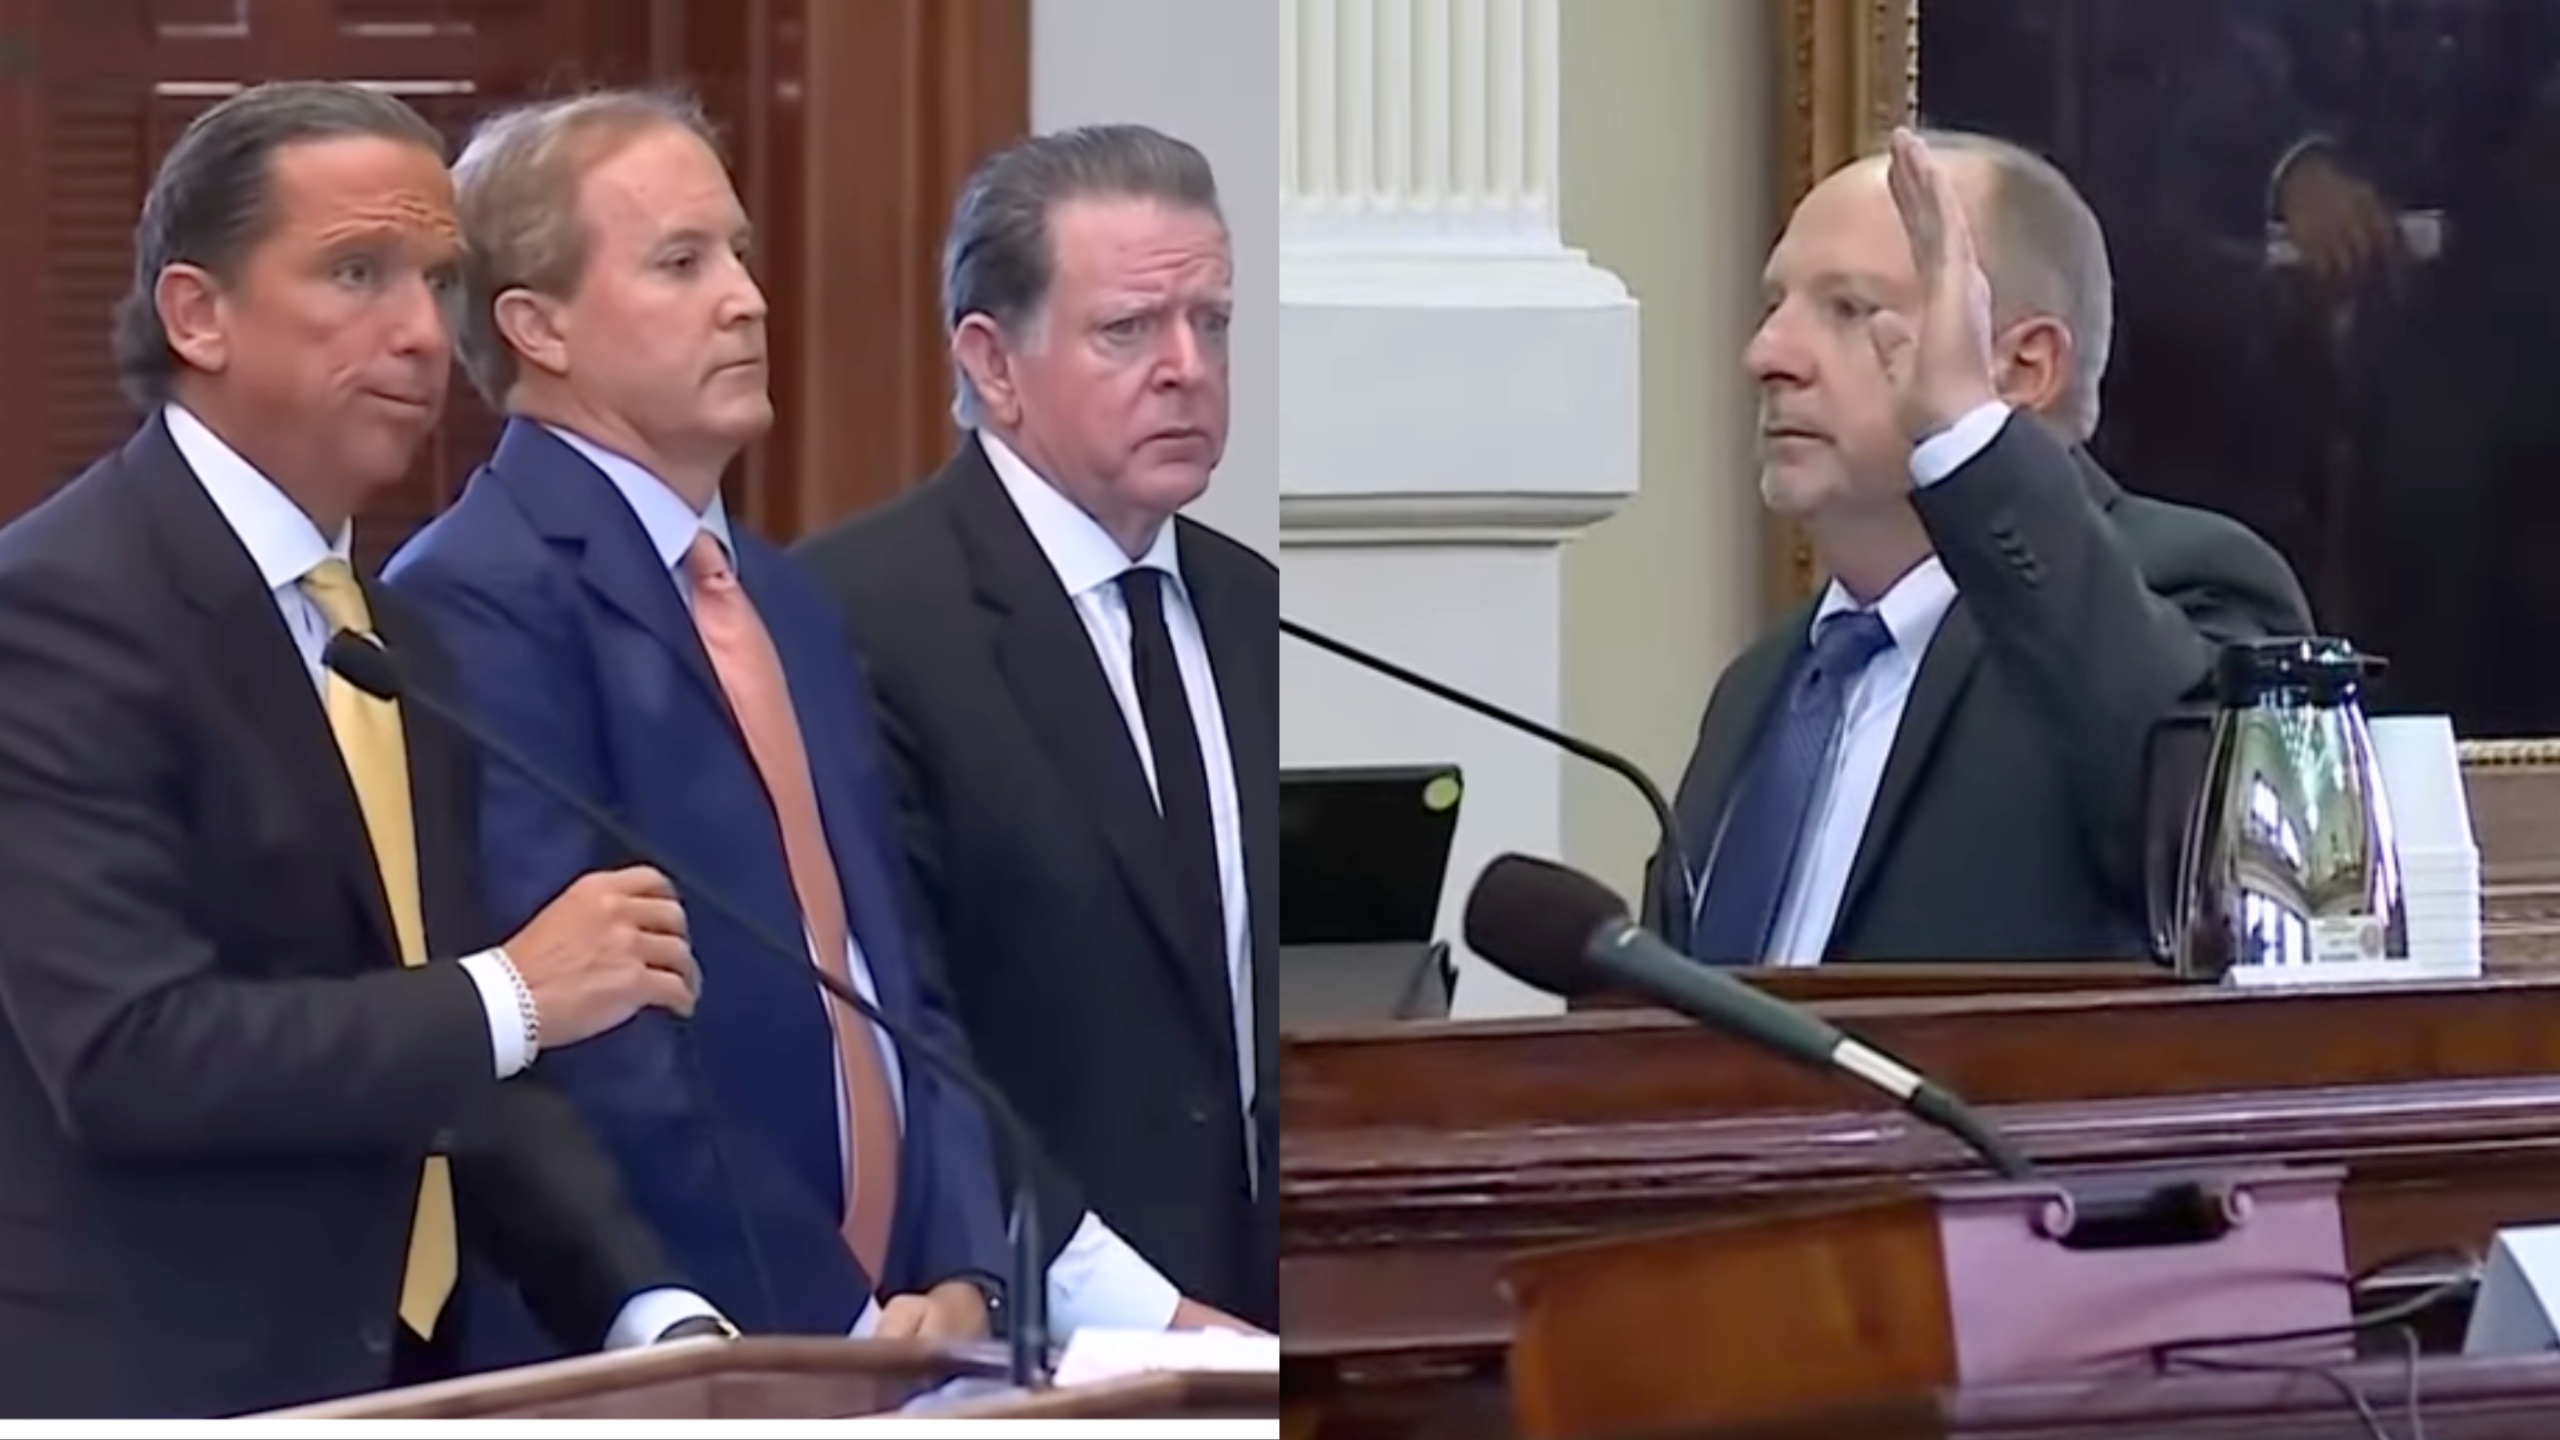 Paxton’s impeachment case collapses as witnesses confess no wrongdoing.